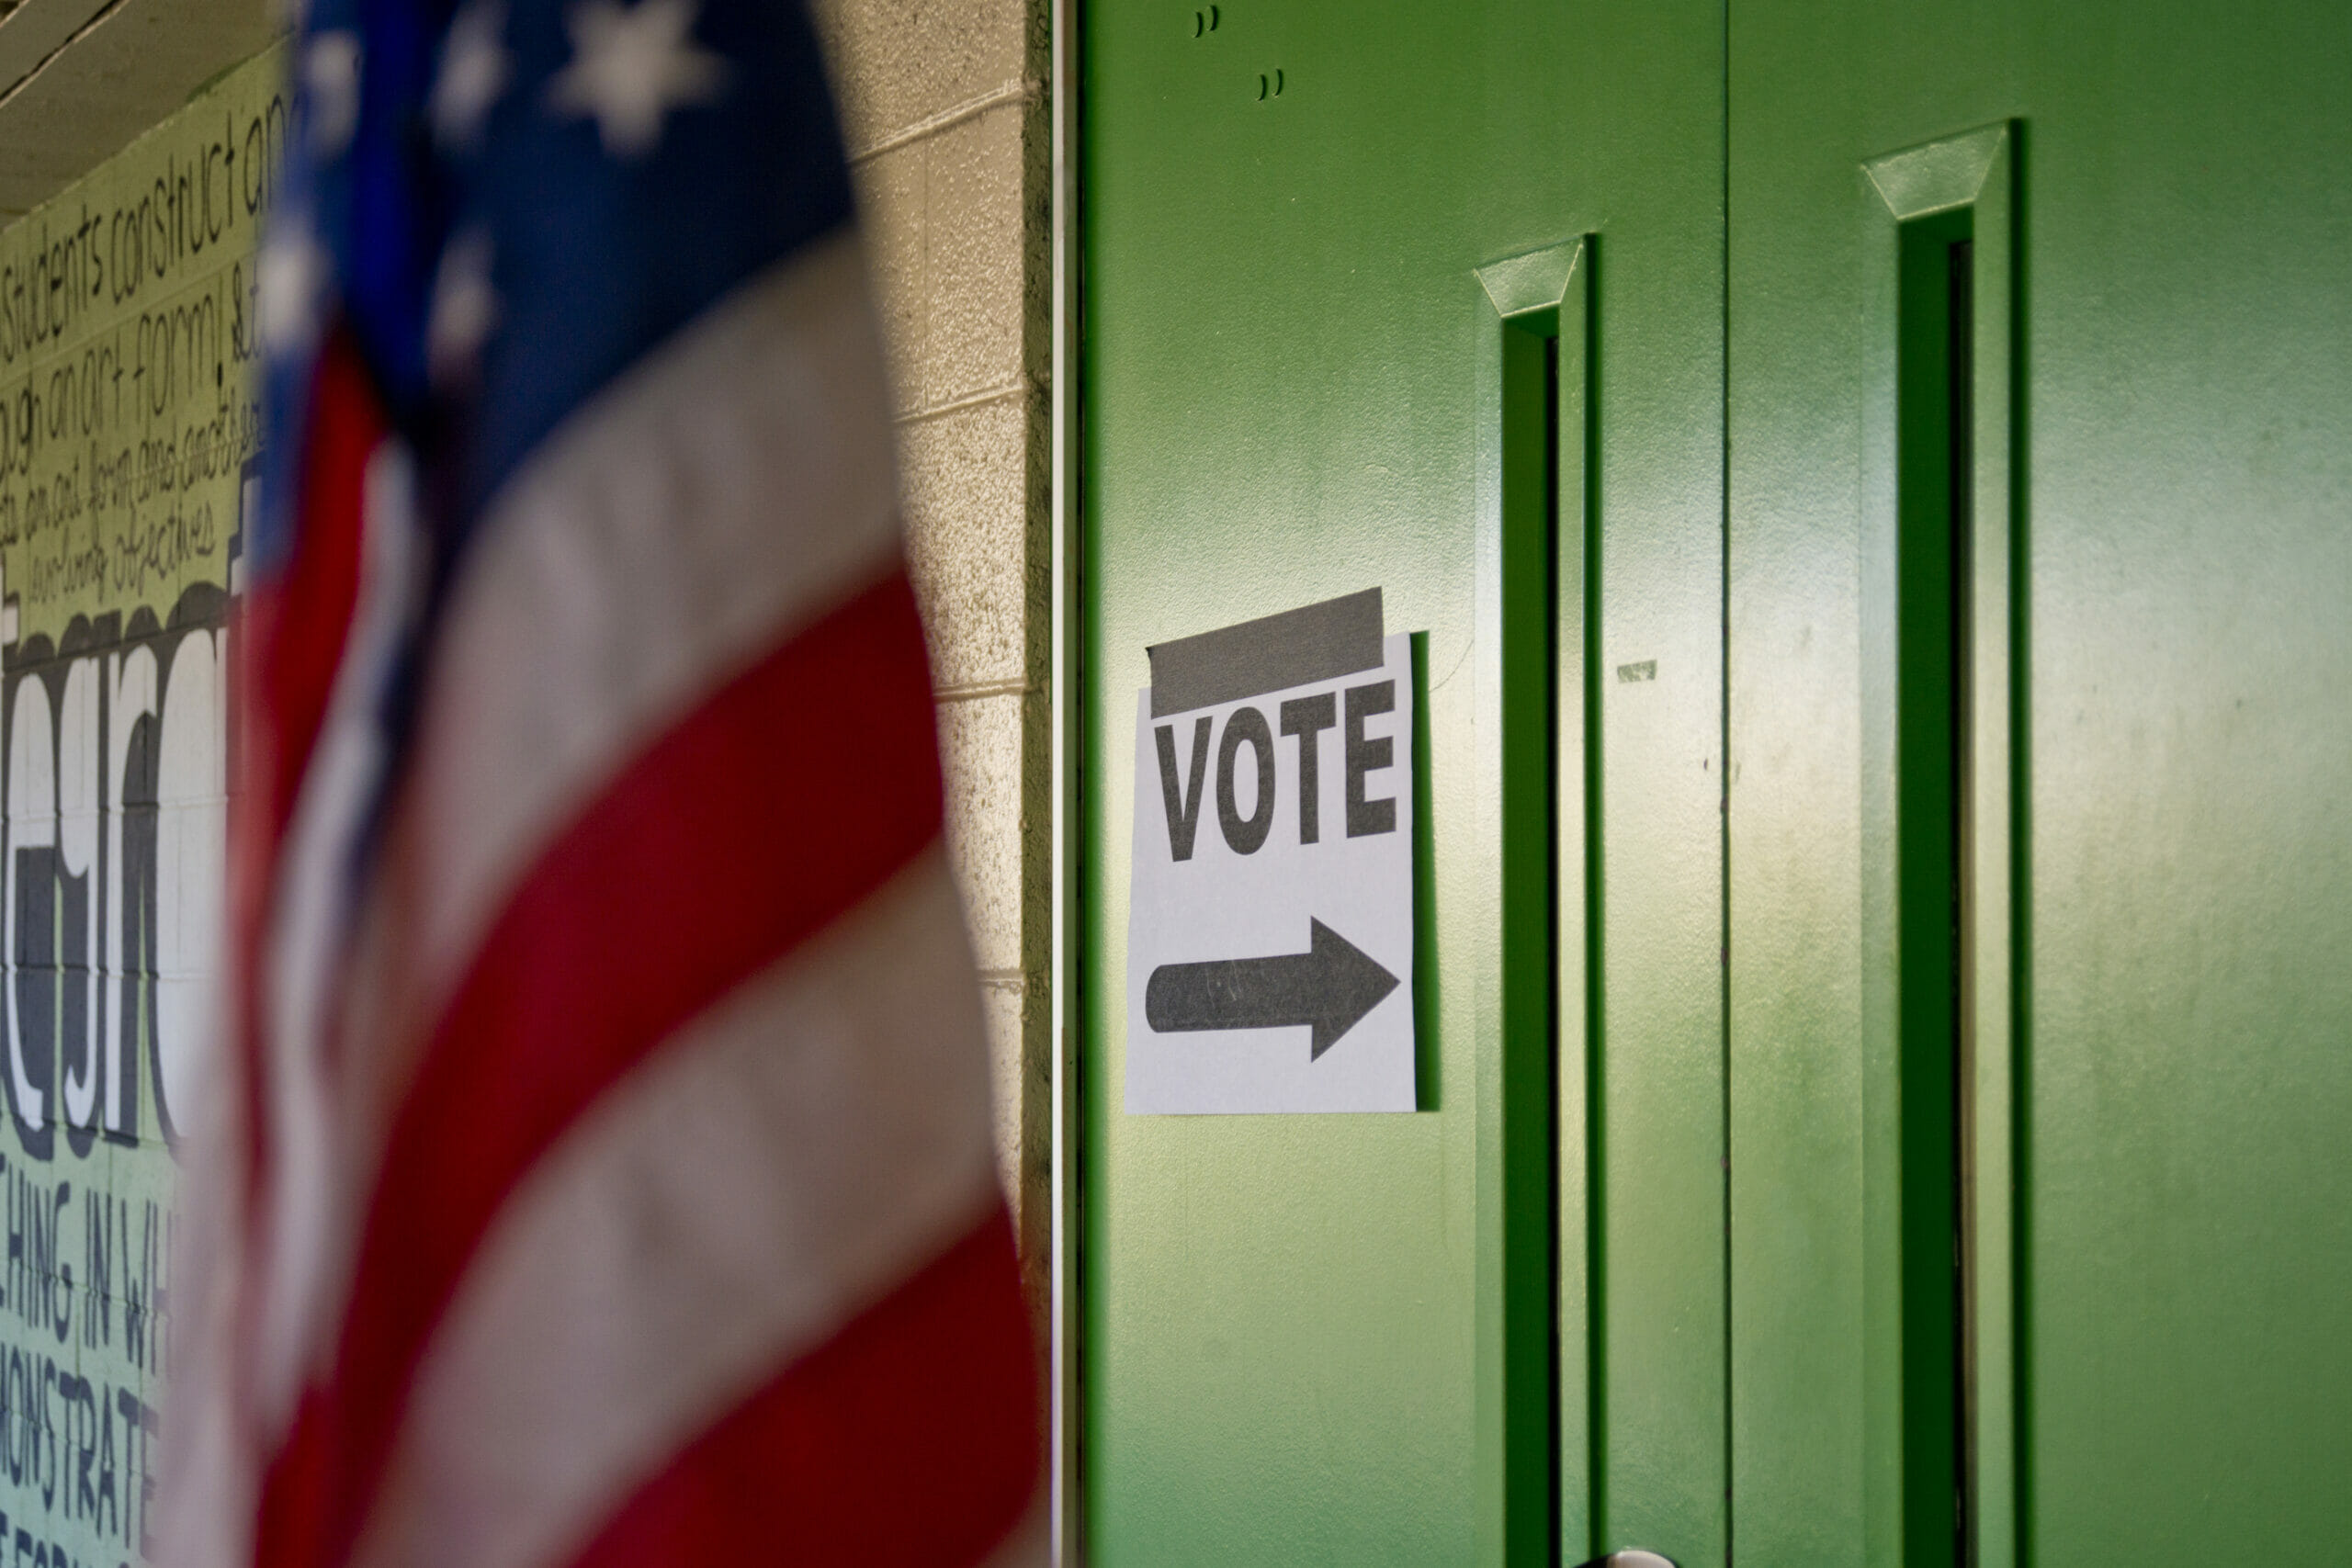 Signage directs voters toward a voting center